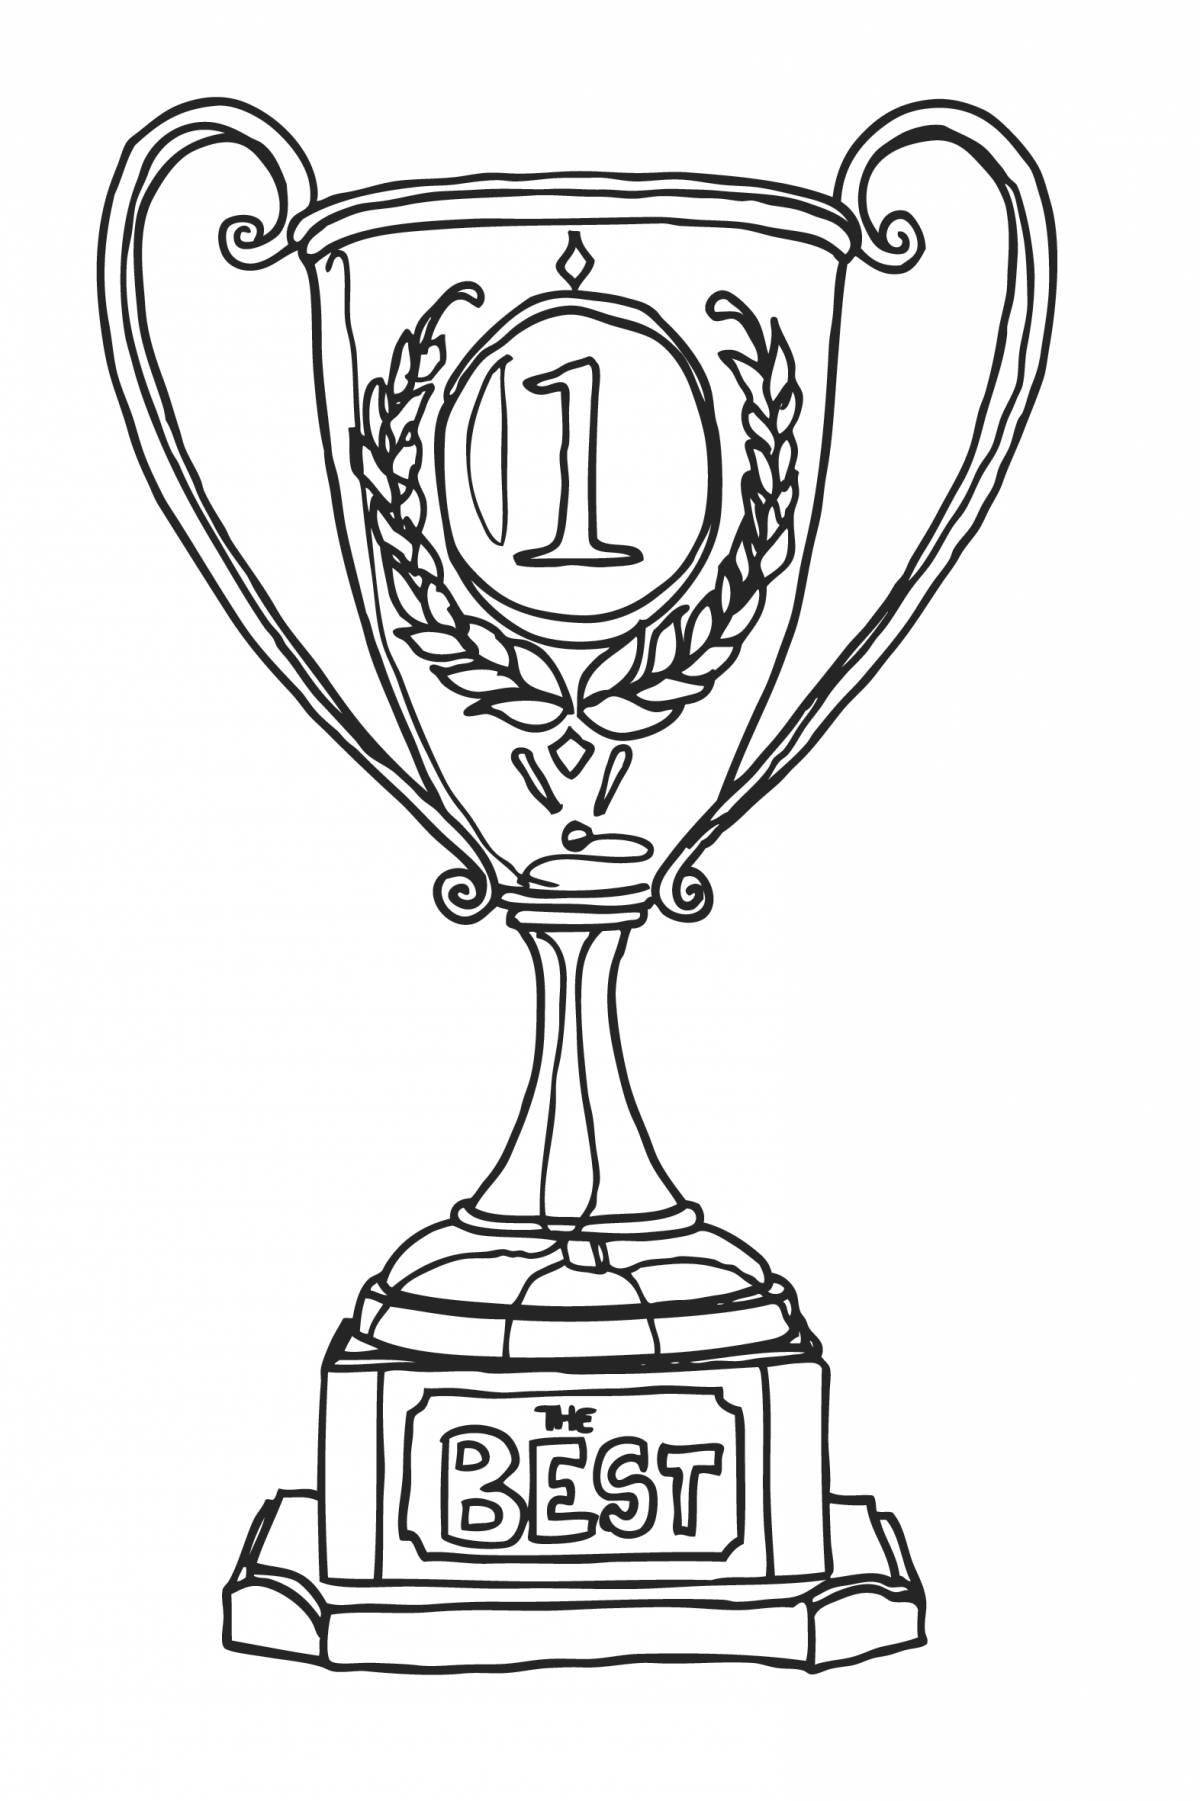 Colourful football cup coloring page